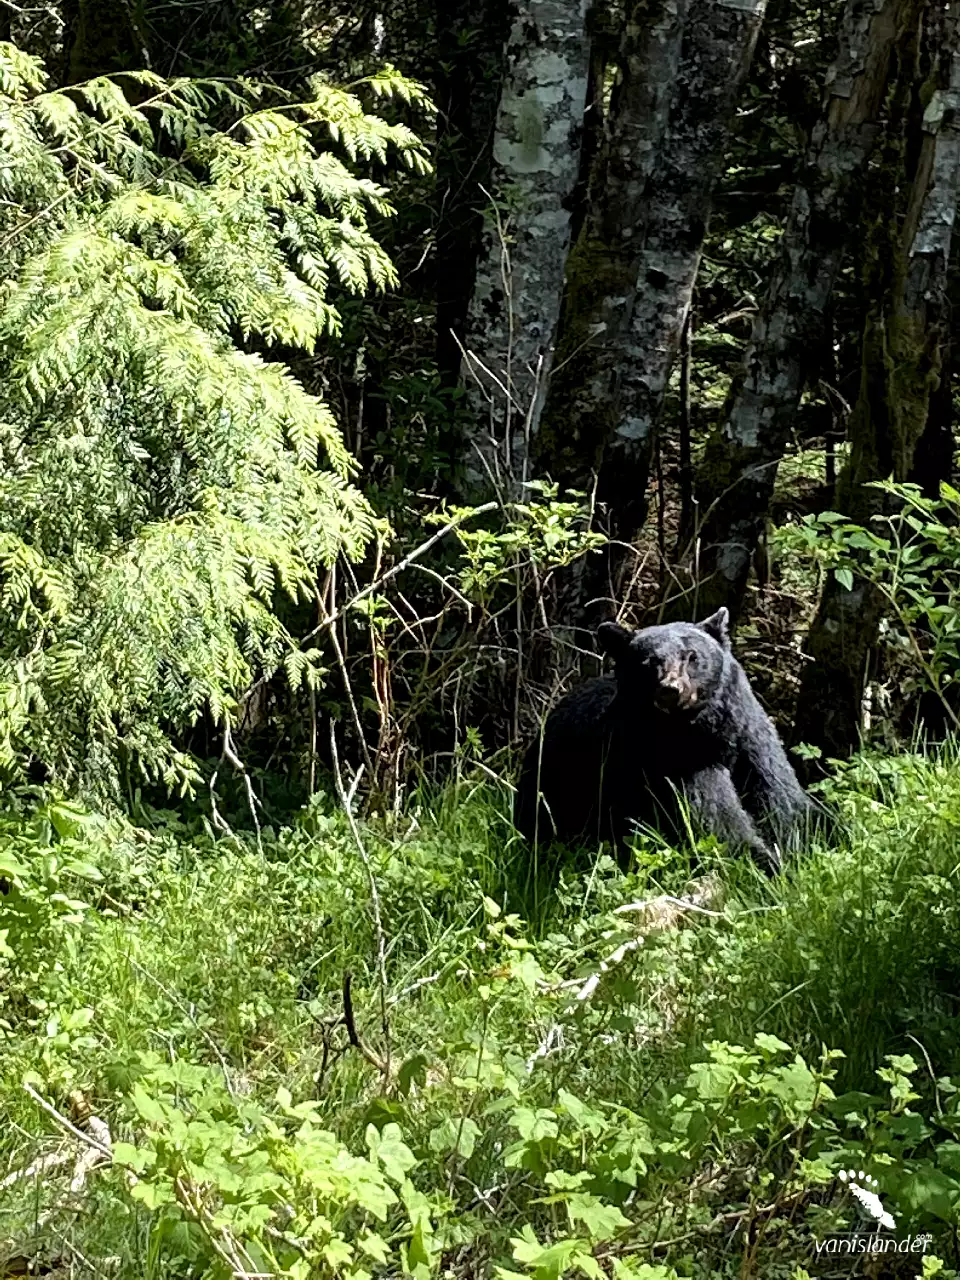 A Bear in the Nature - Port Alice, Vancouver Island